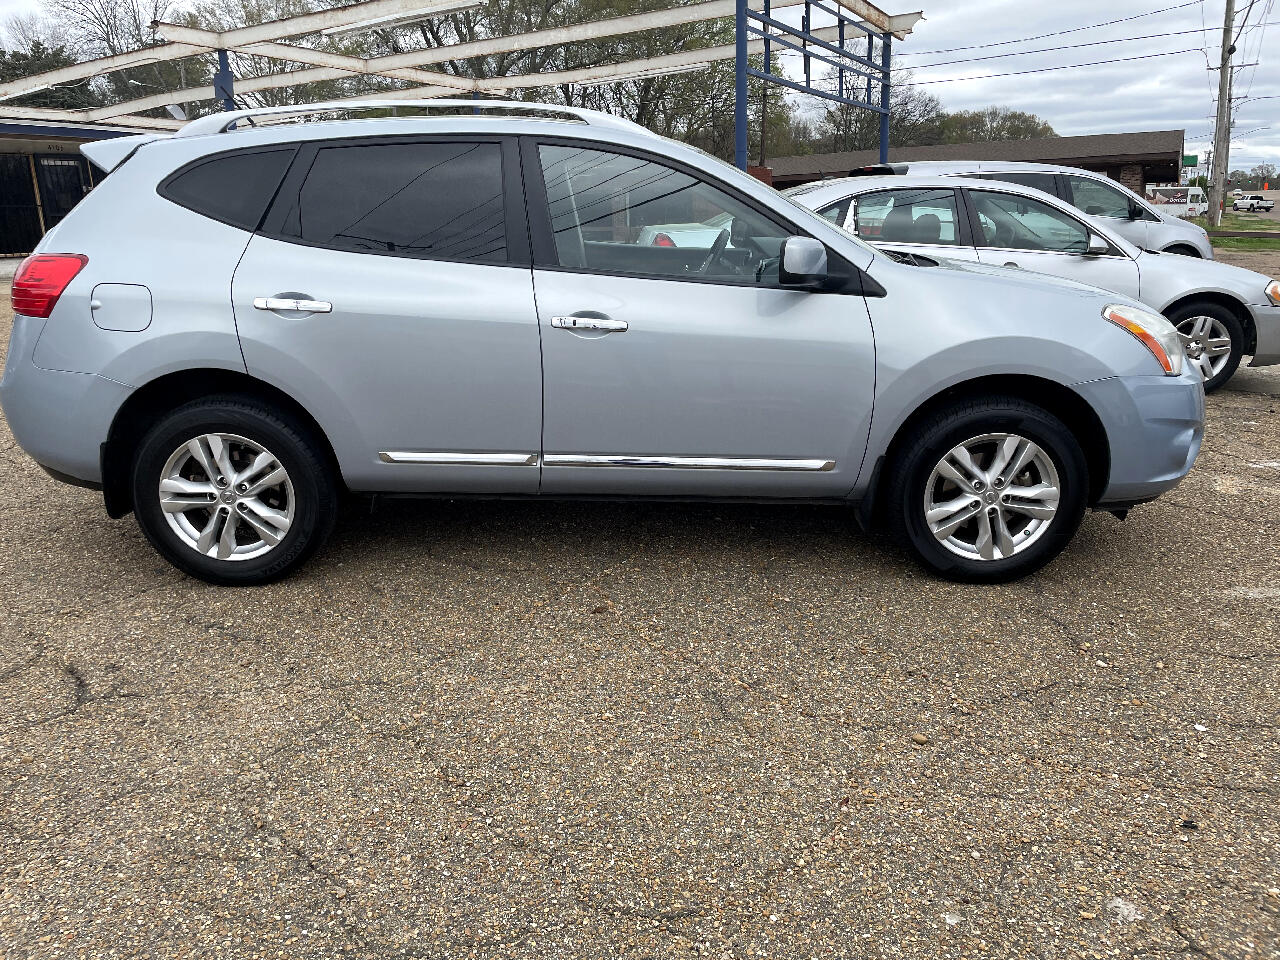 Used 2013 Nissan Rogue SV FWD for Sale in Jackson MS 39213 North ...